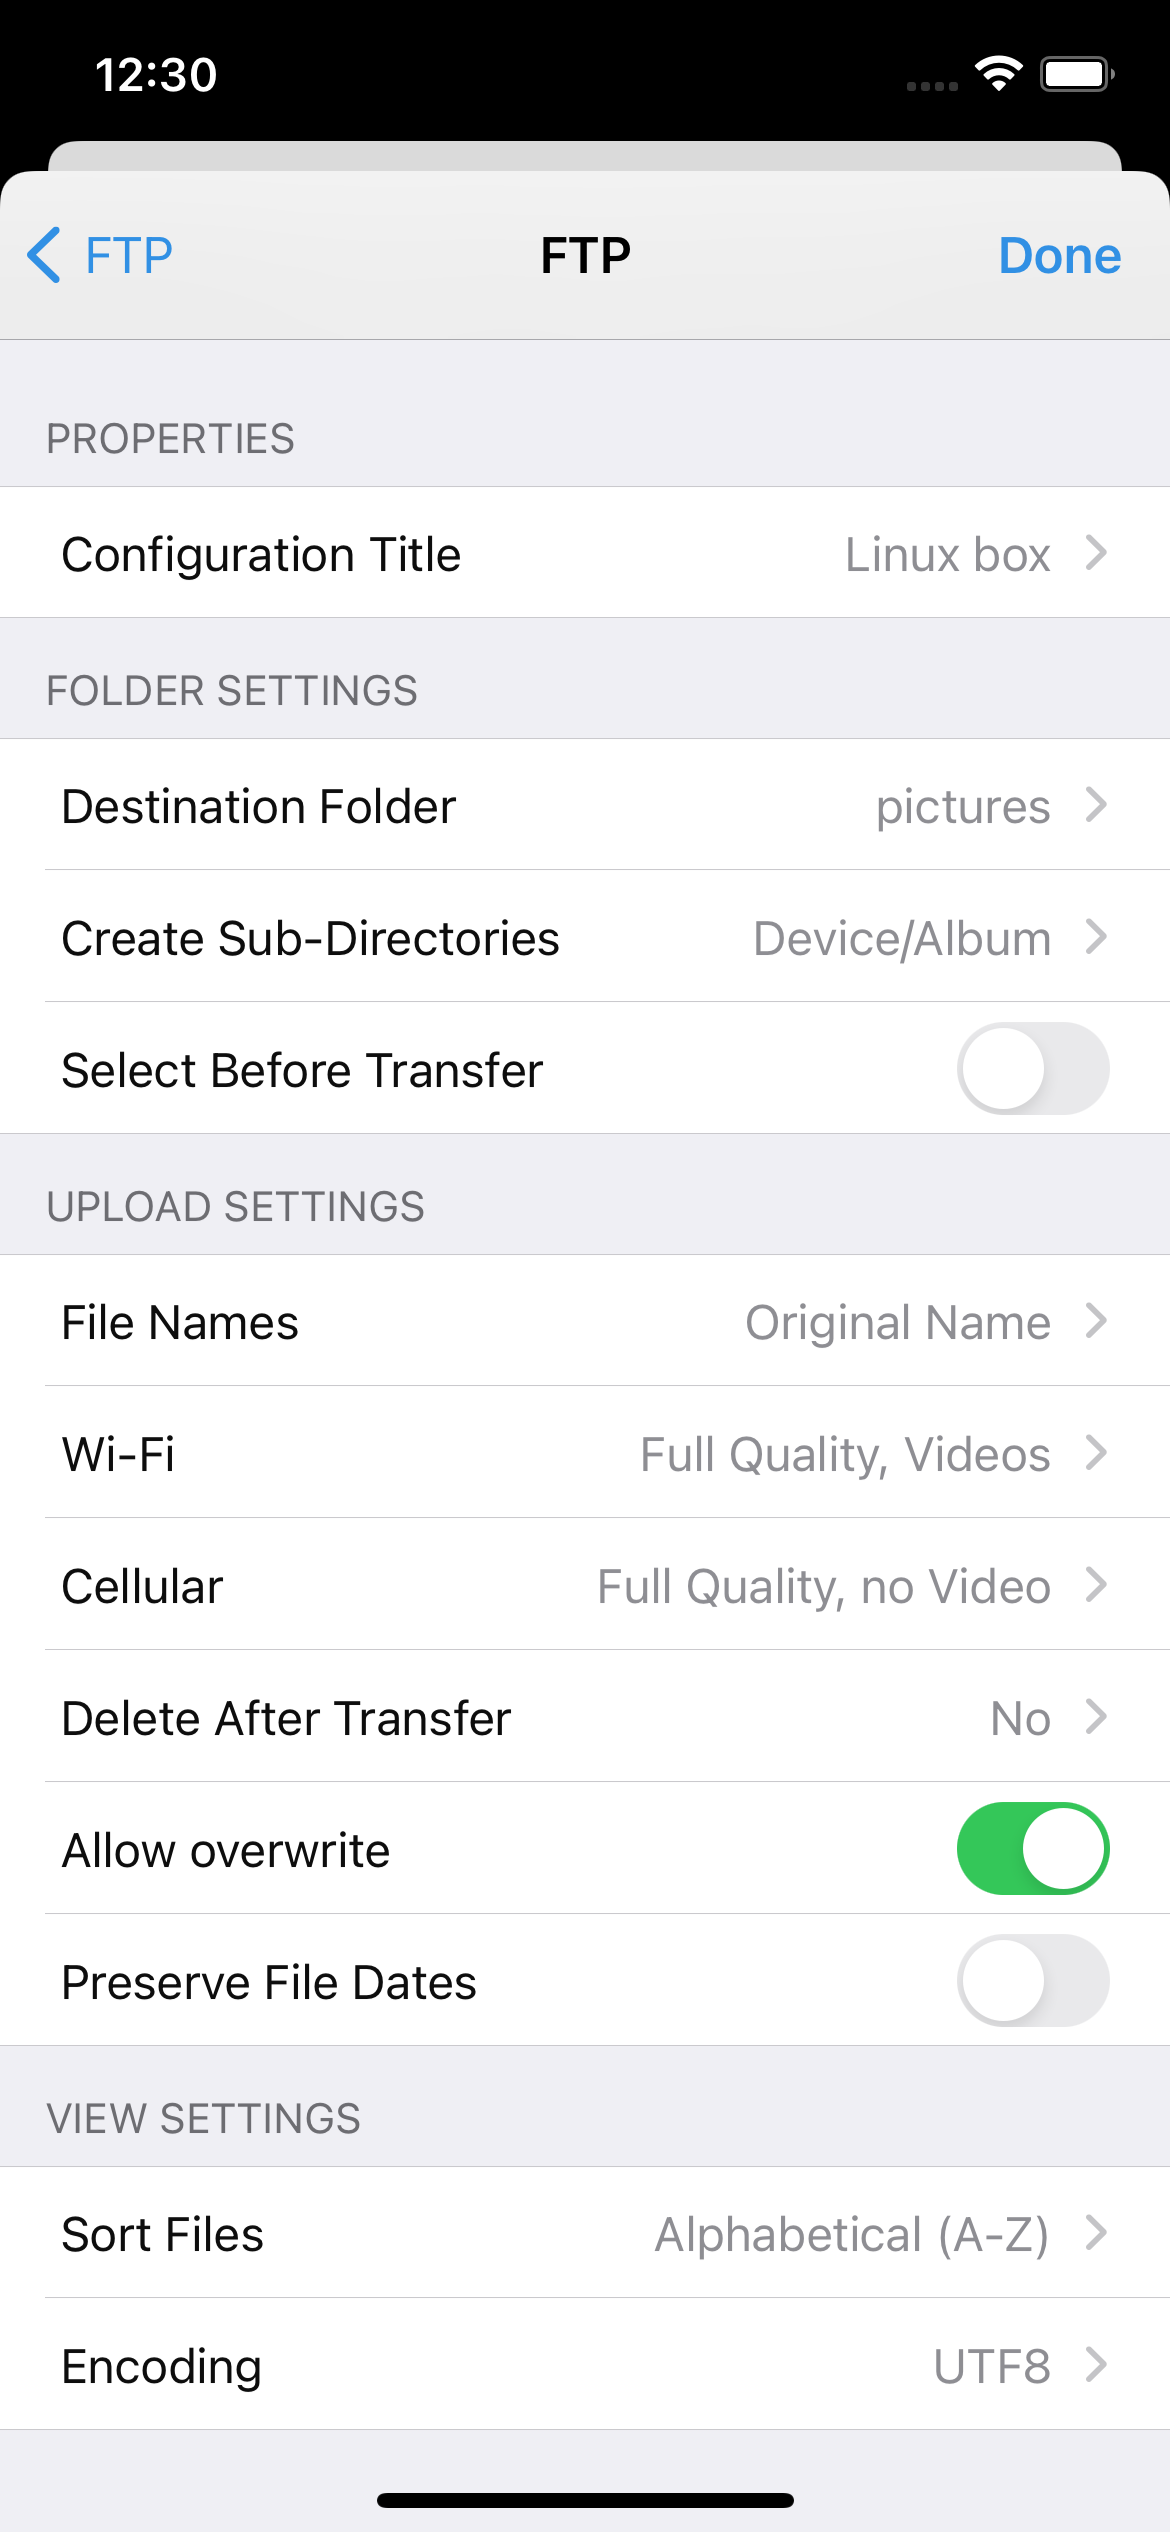 FTP settings with destination folder selection